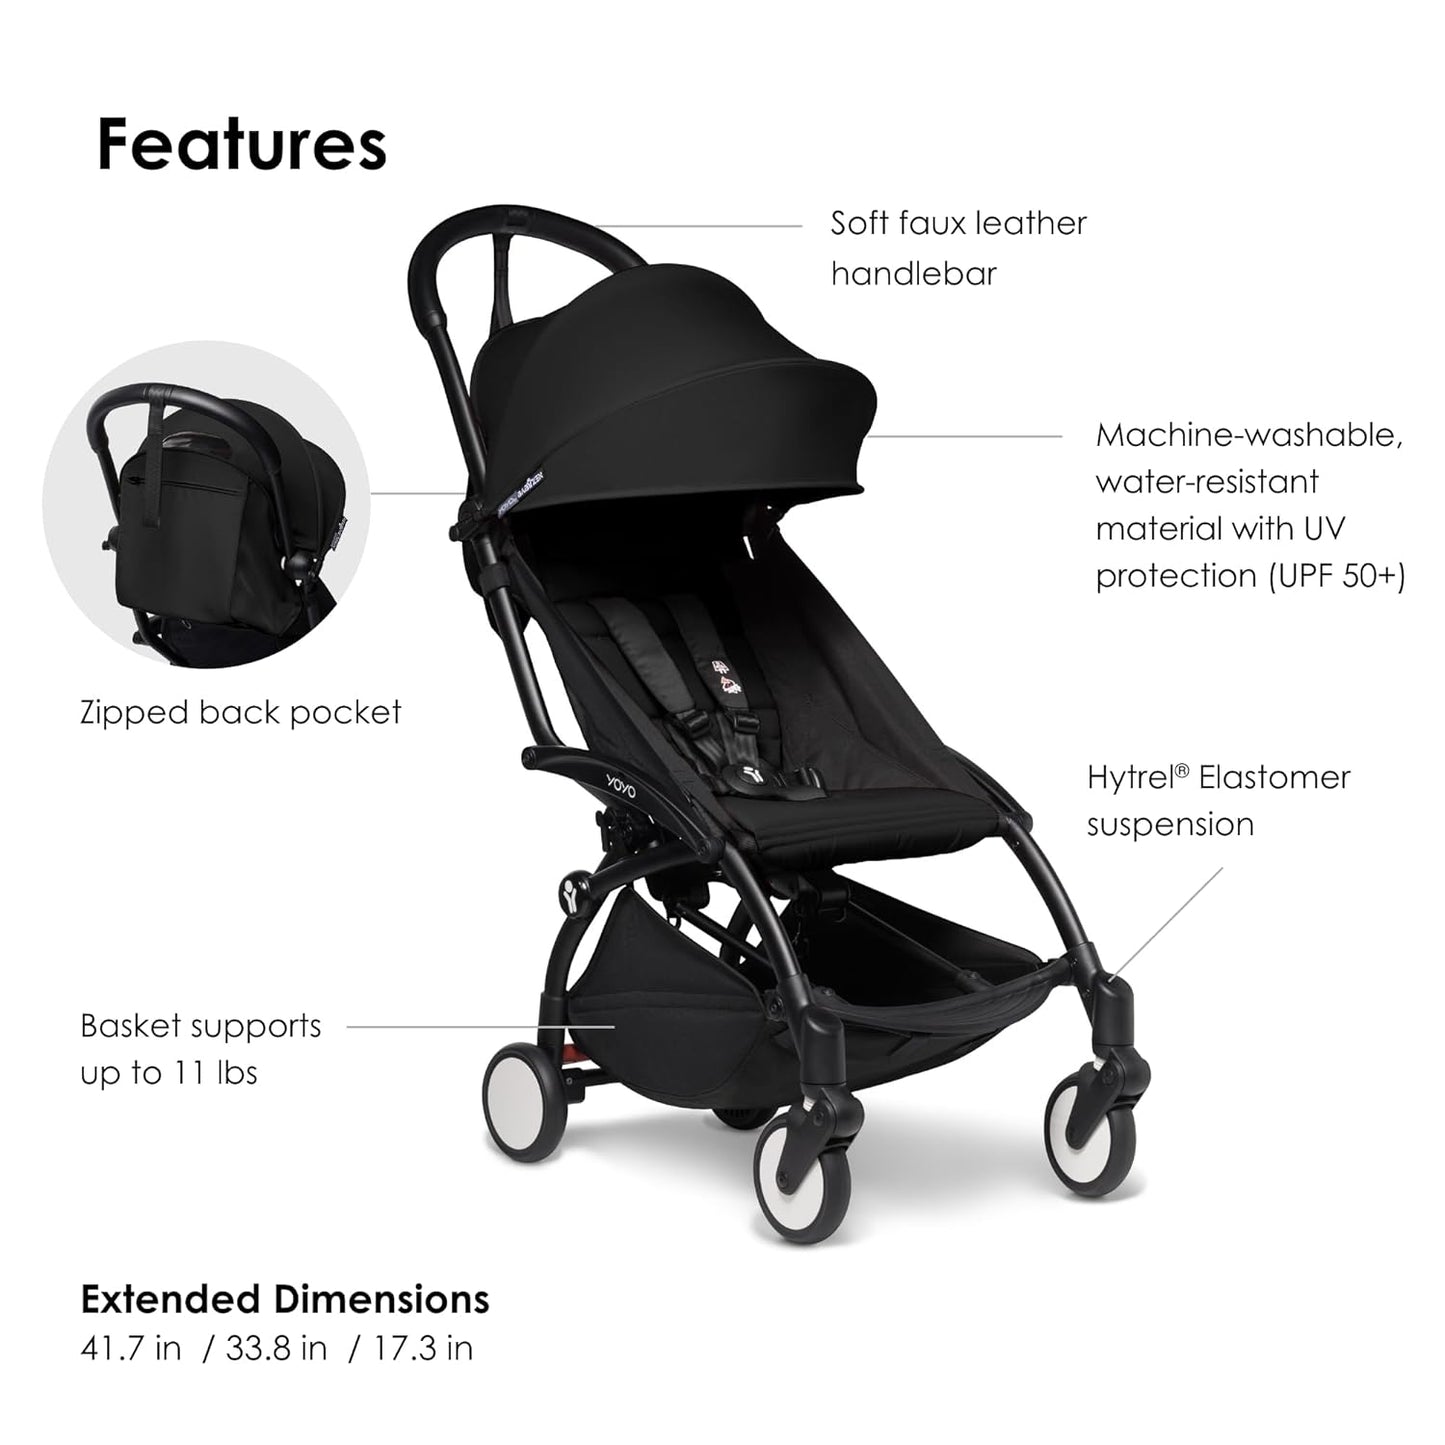 BABYZEN YOYO2 Stroller - Lightweight & Compact - Includes Black Frame, Black Seat Cushion + Matching Canopy - Suitable for Children Up to 48.5 Lbs